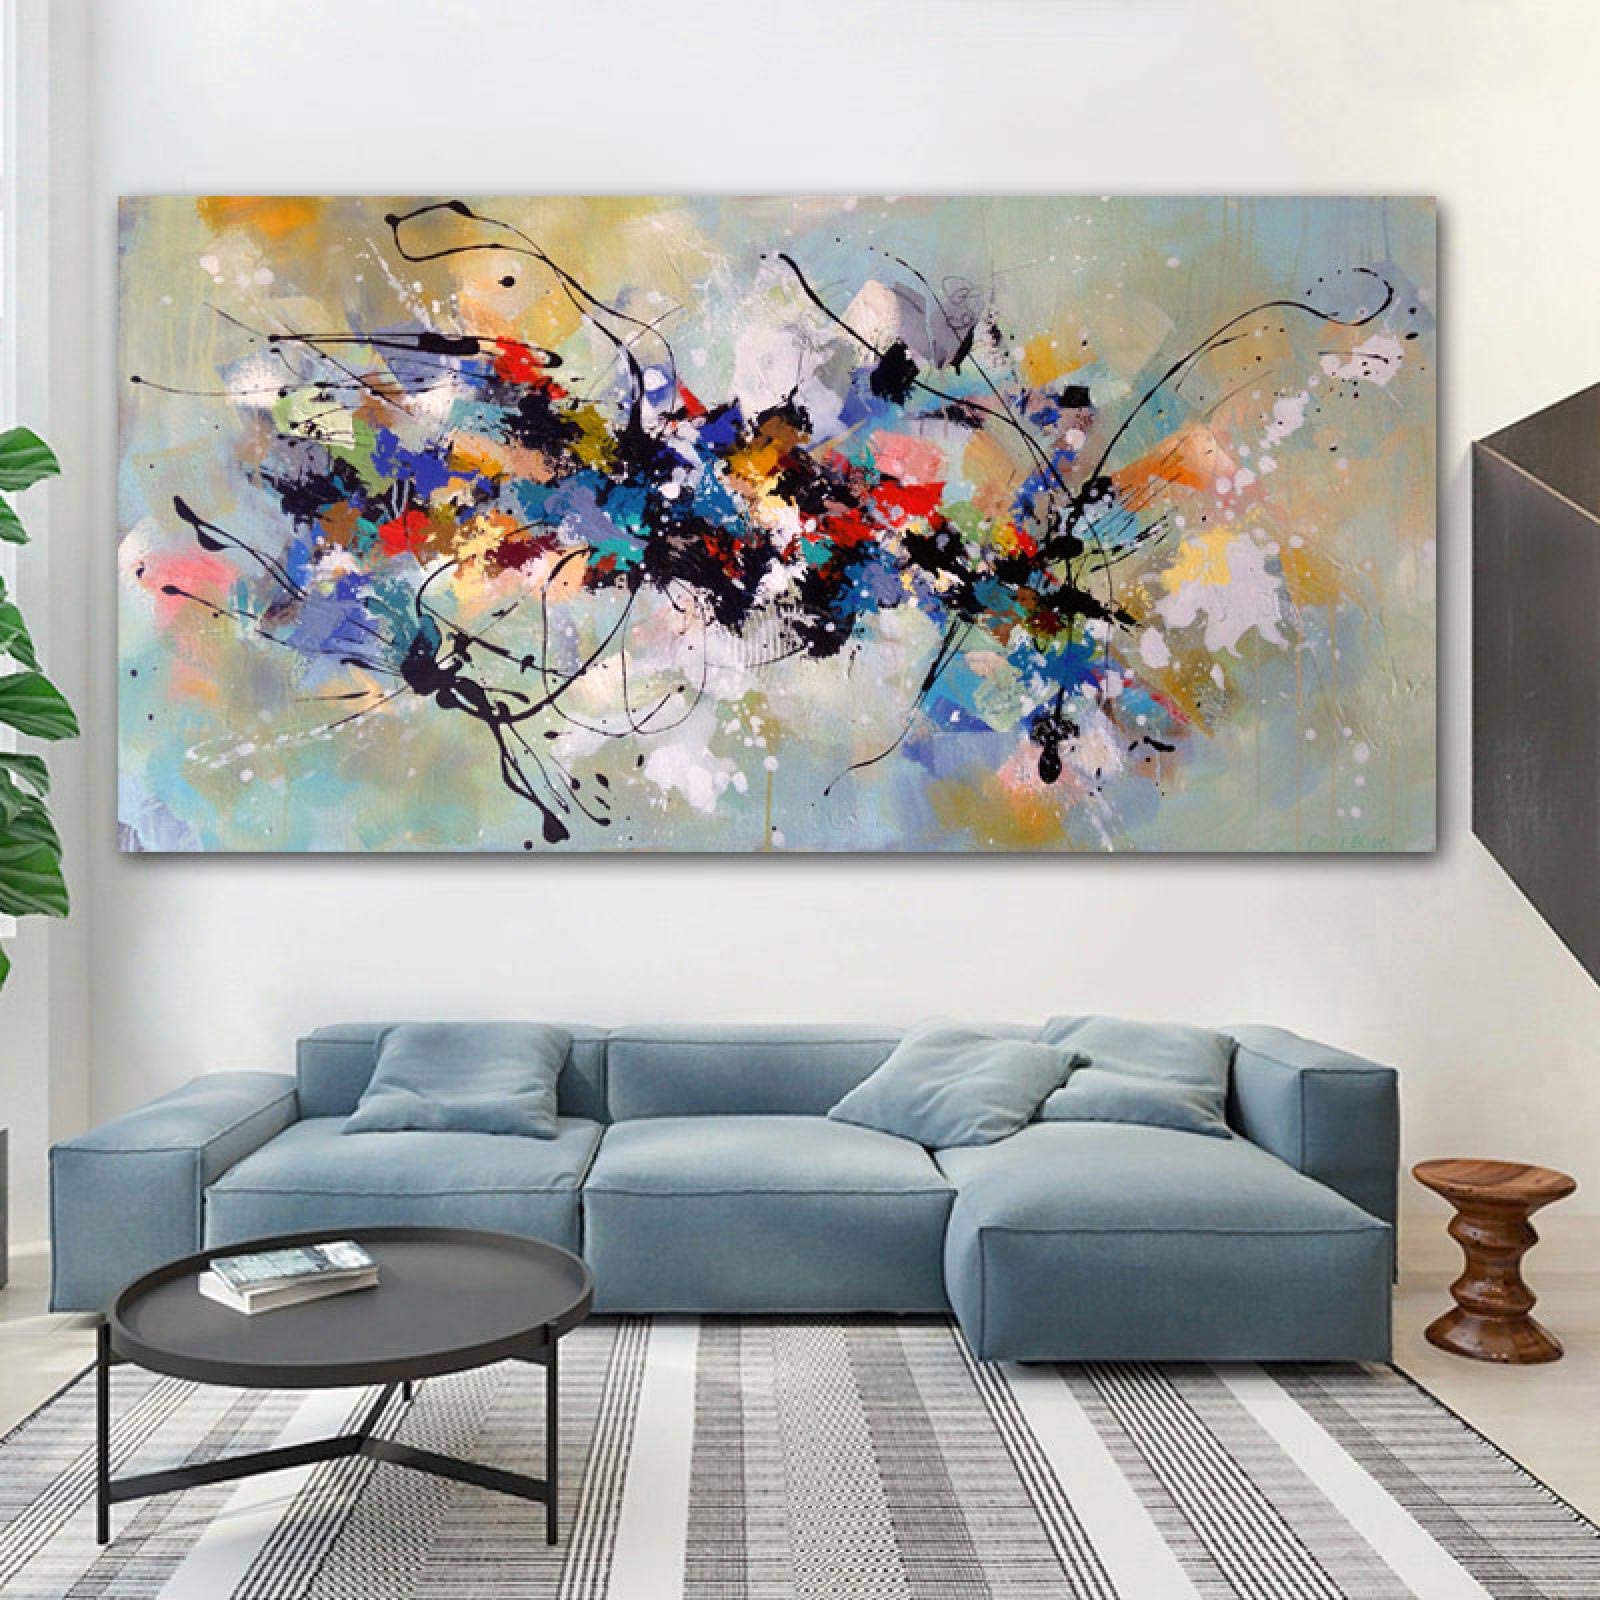 ZhaoyangArt Modern Abstract Painting on Canvas Colorful Posters and Print Scandinavian Wall Art Picture for Living Room Home Decoration 75x150cm(30...